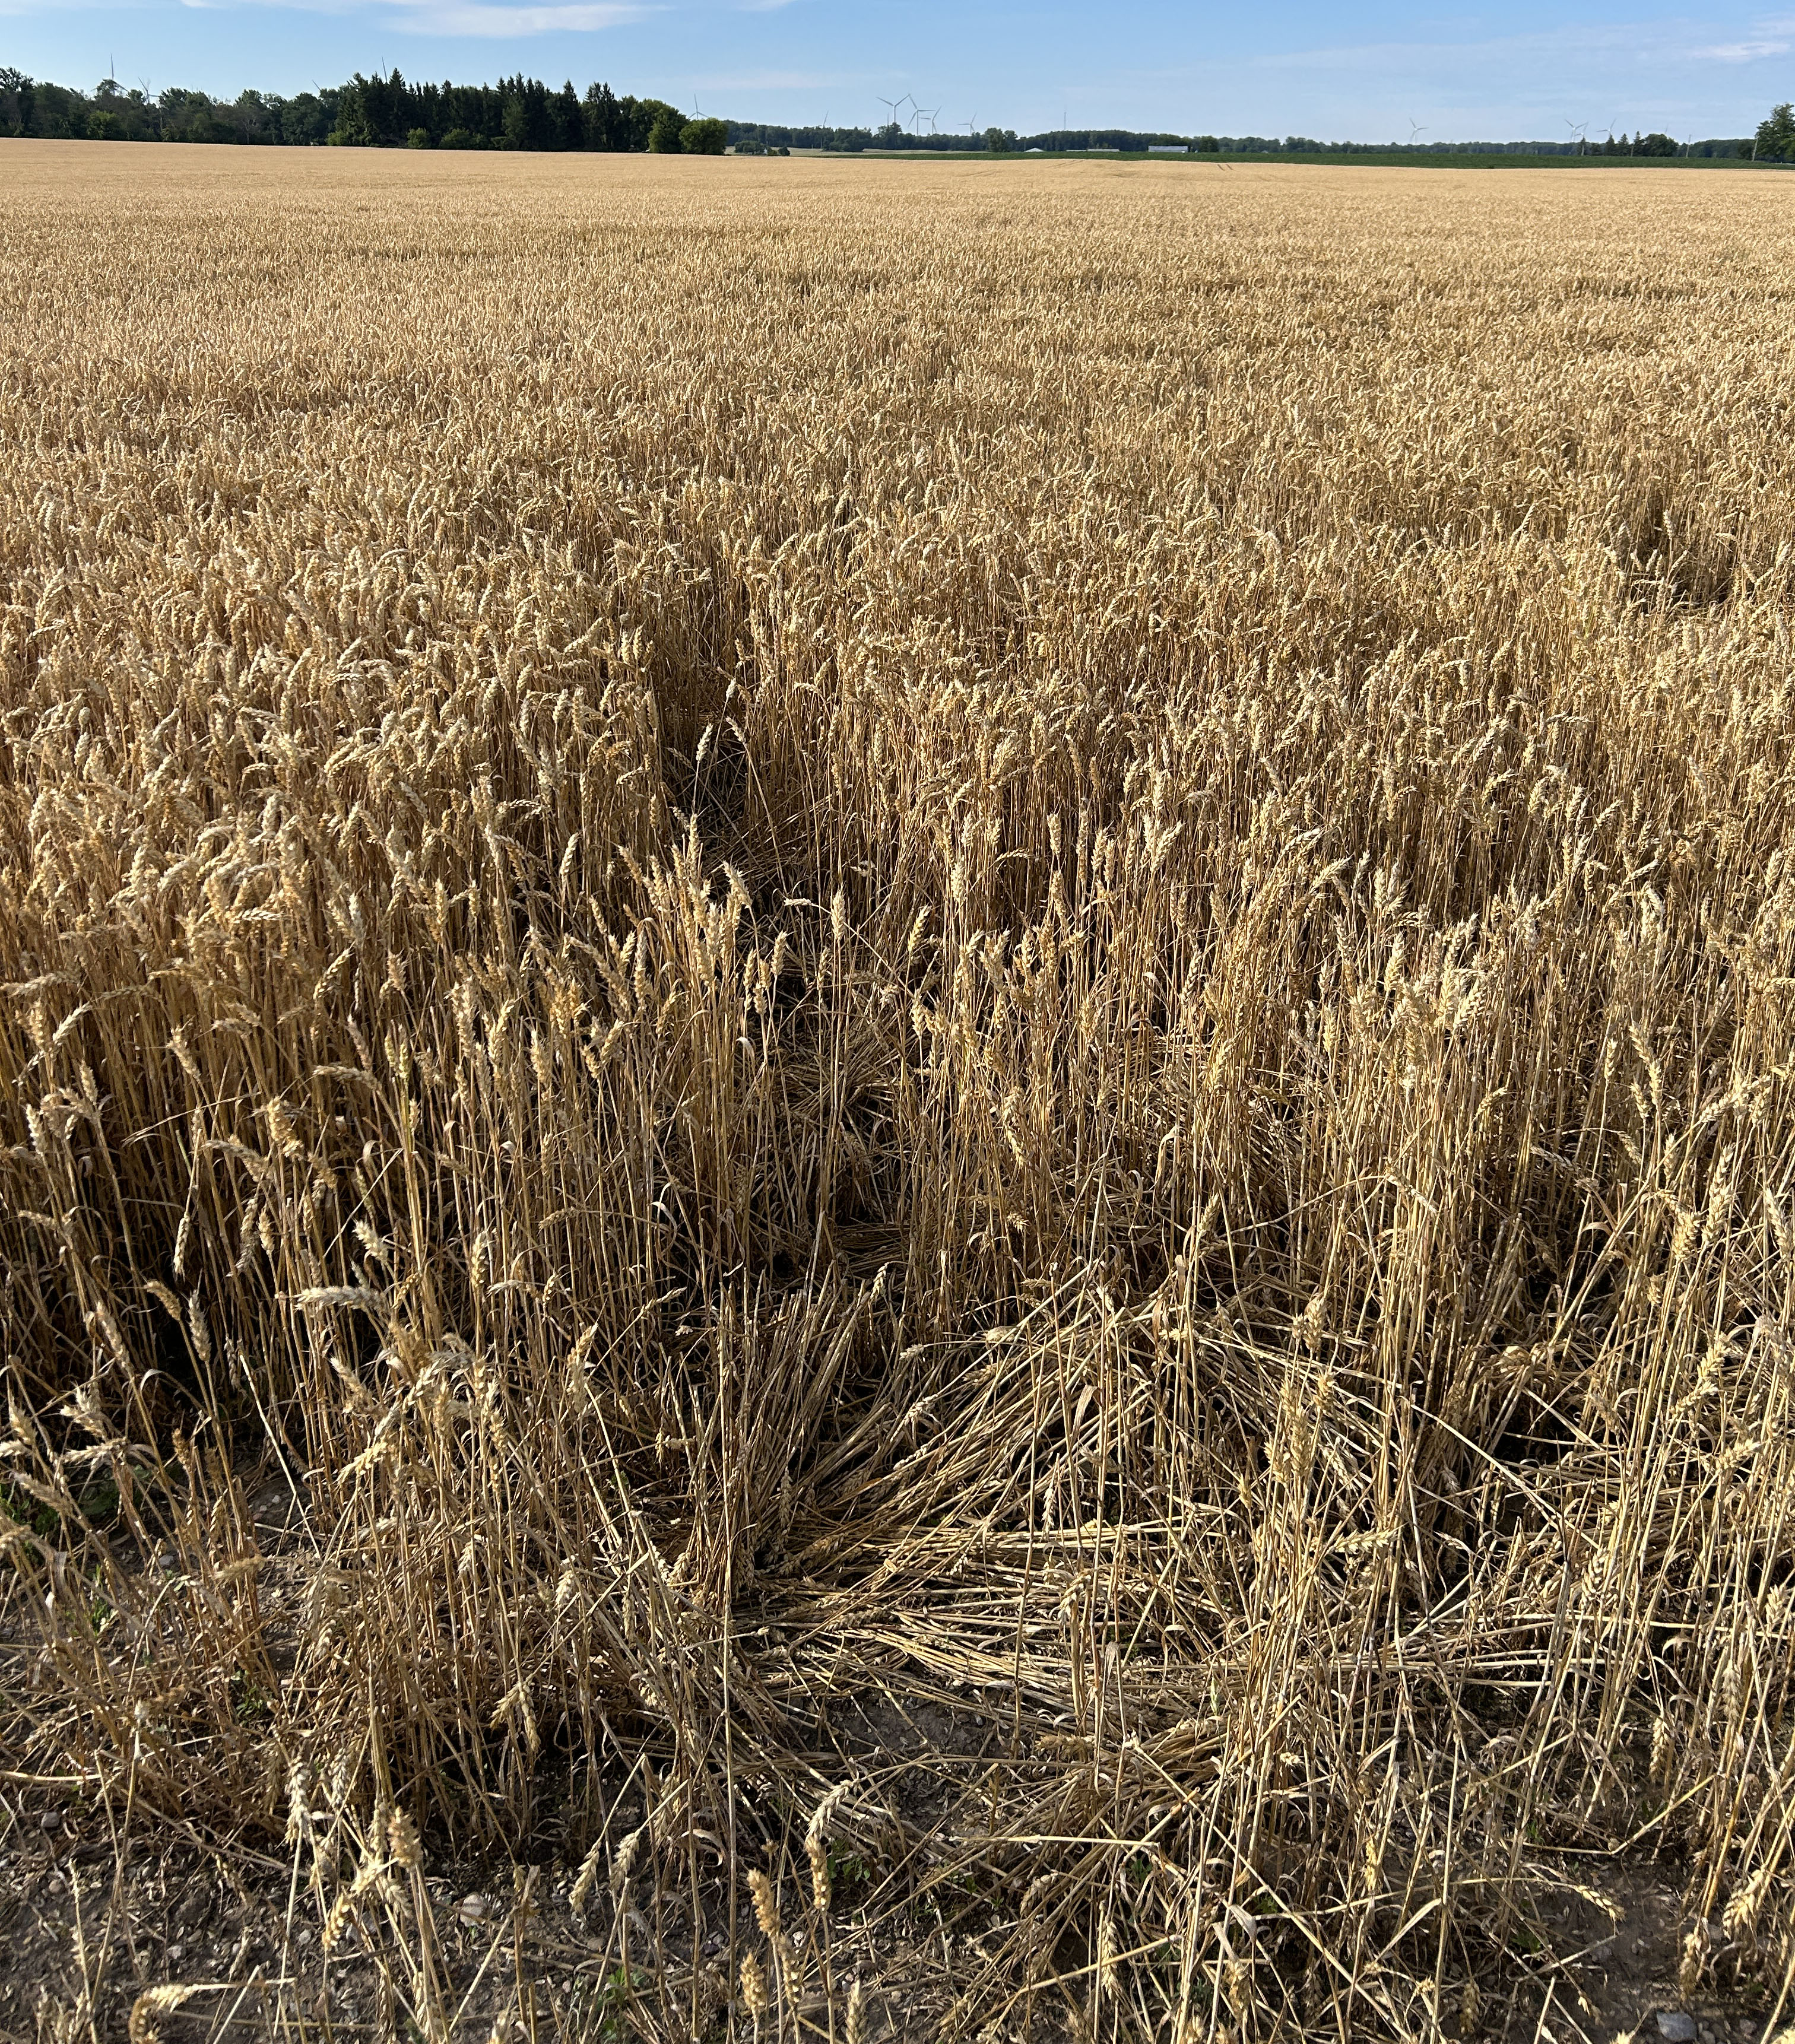 Wheat in a field ready to be harvested.